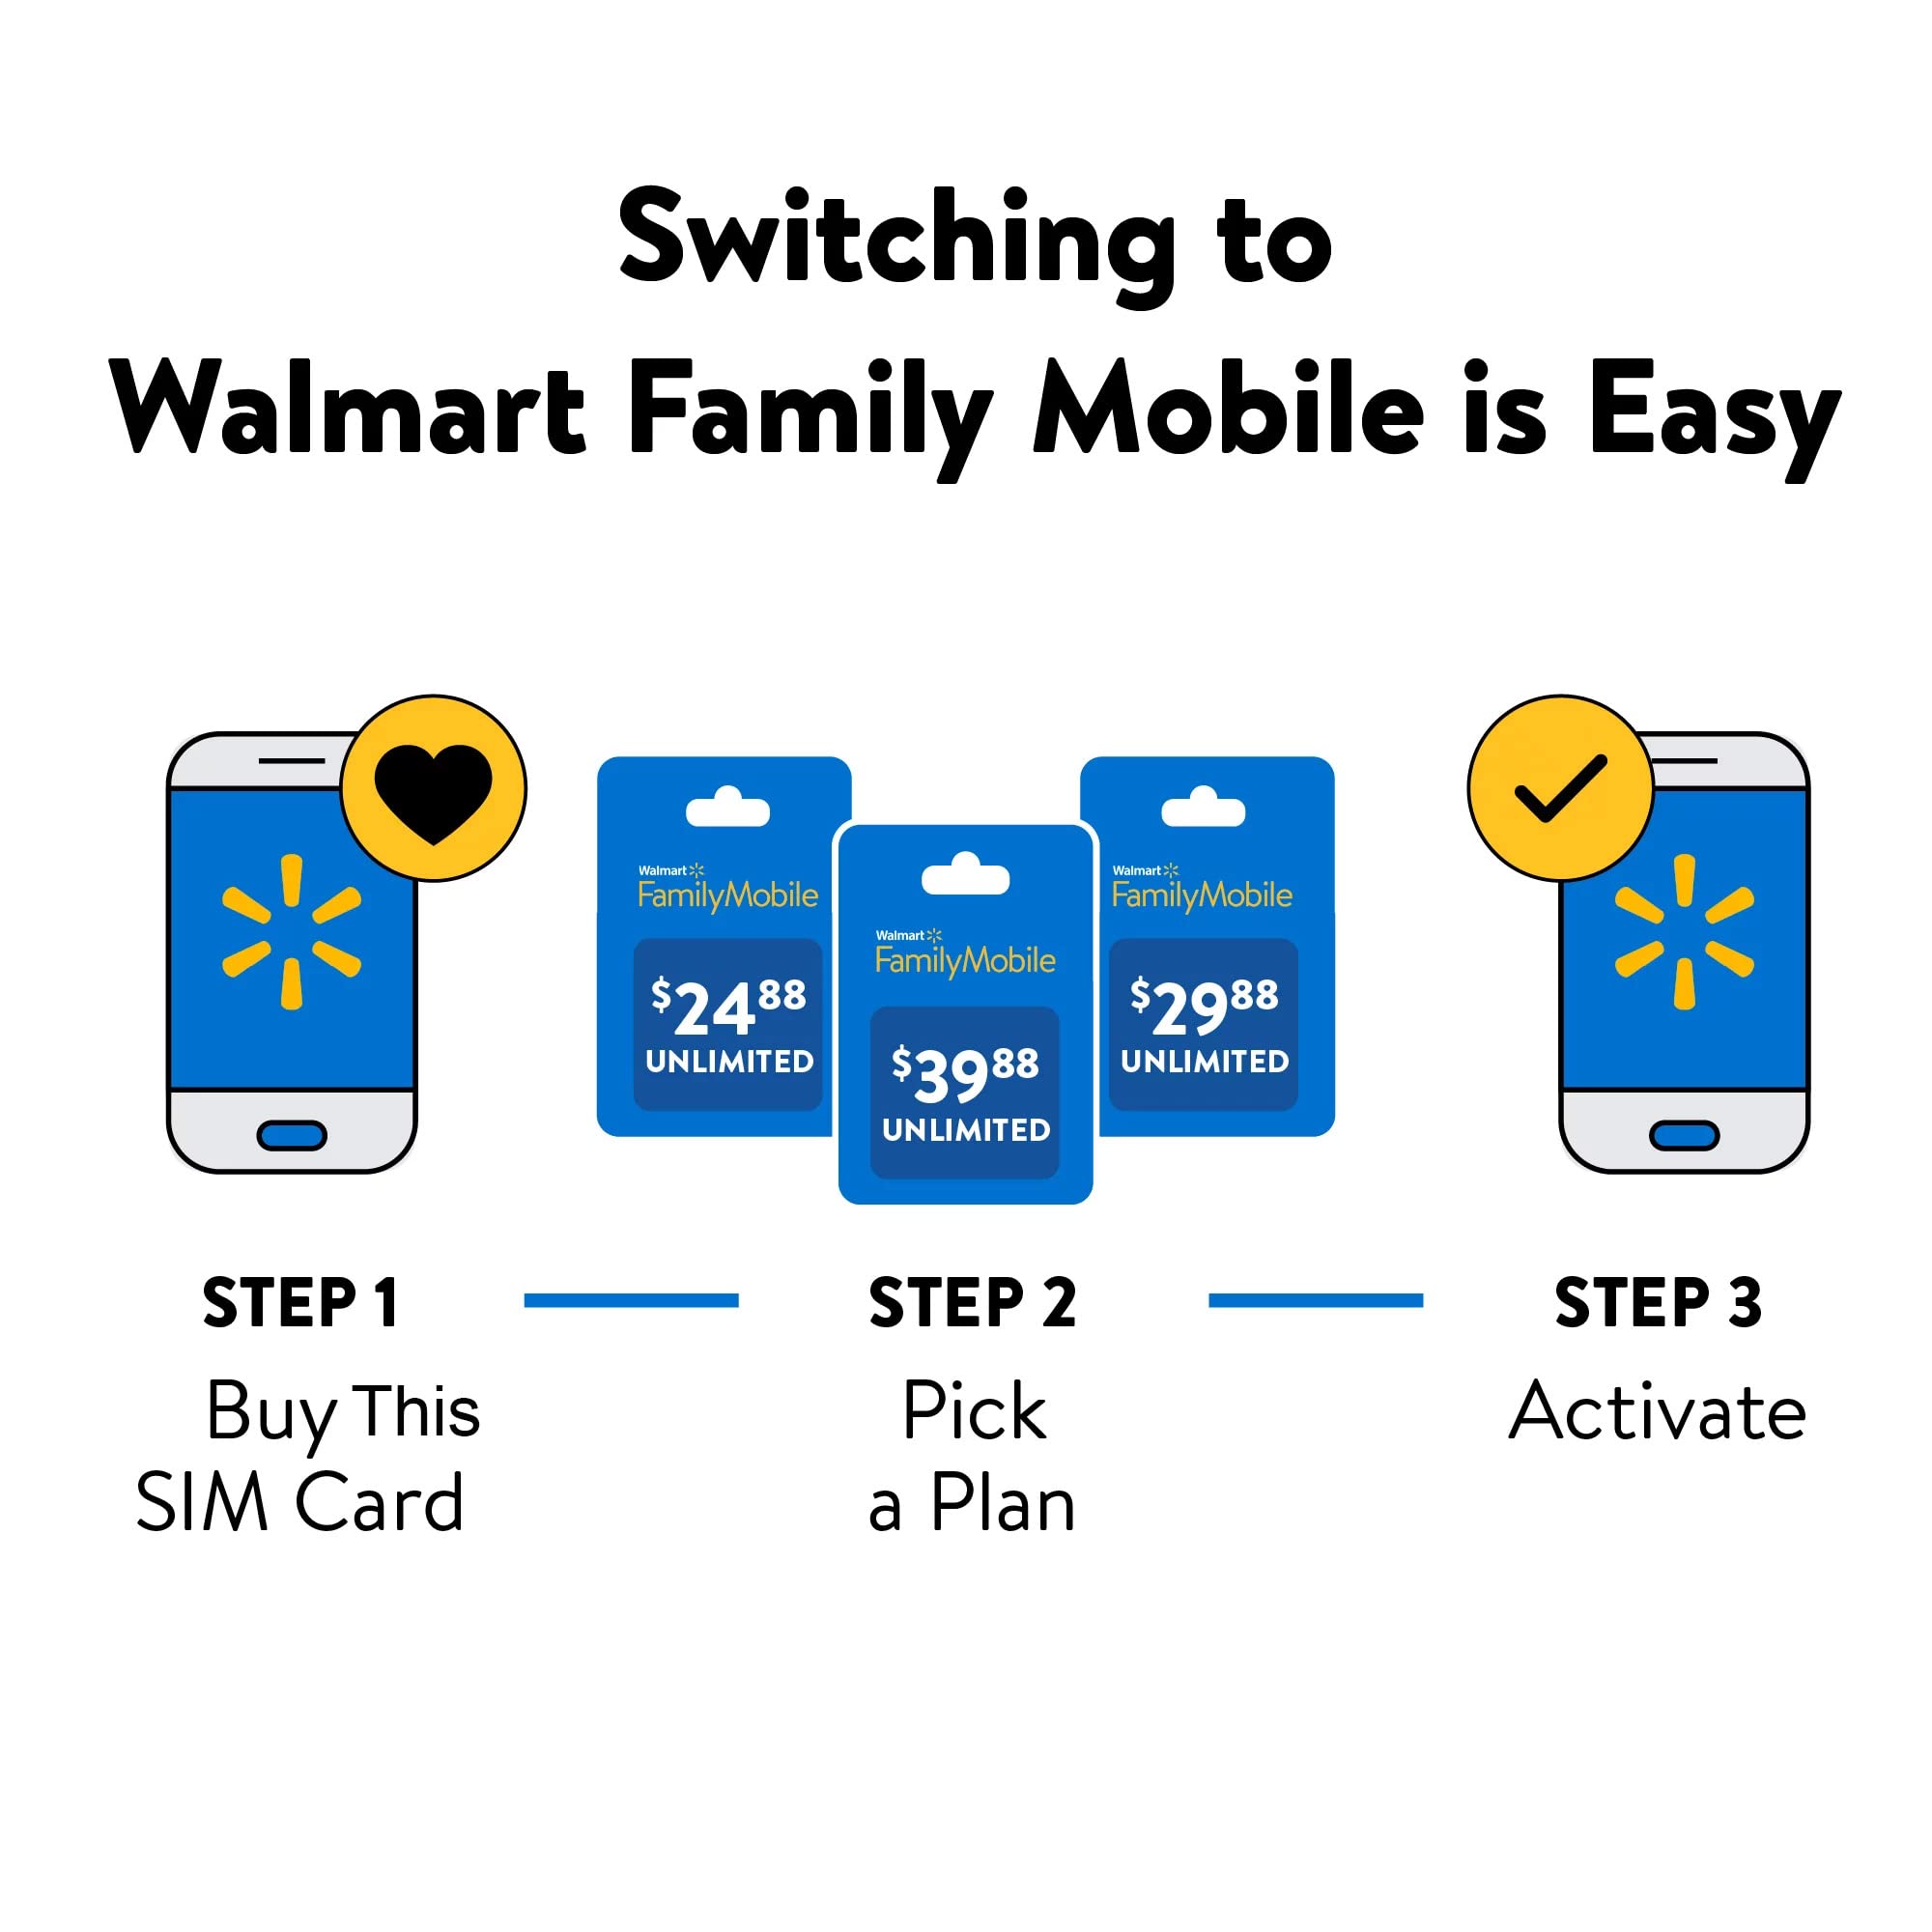 Keep Your Own Phone SIM Card Kit (KYOP) for Walmart Family Mobile (2023 New)